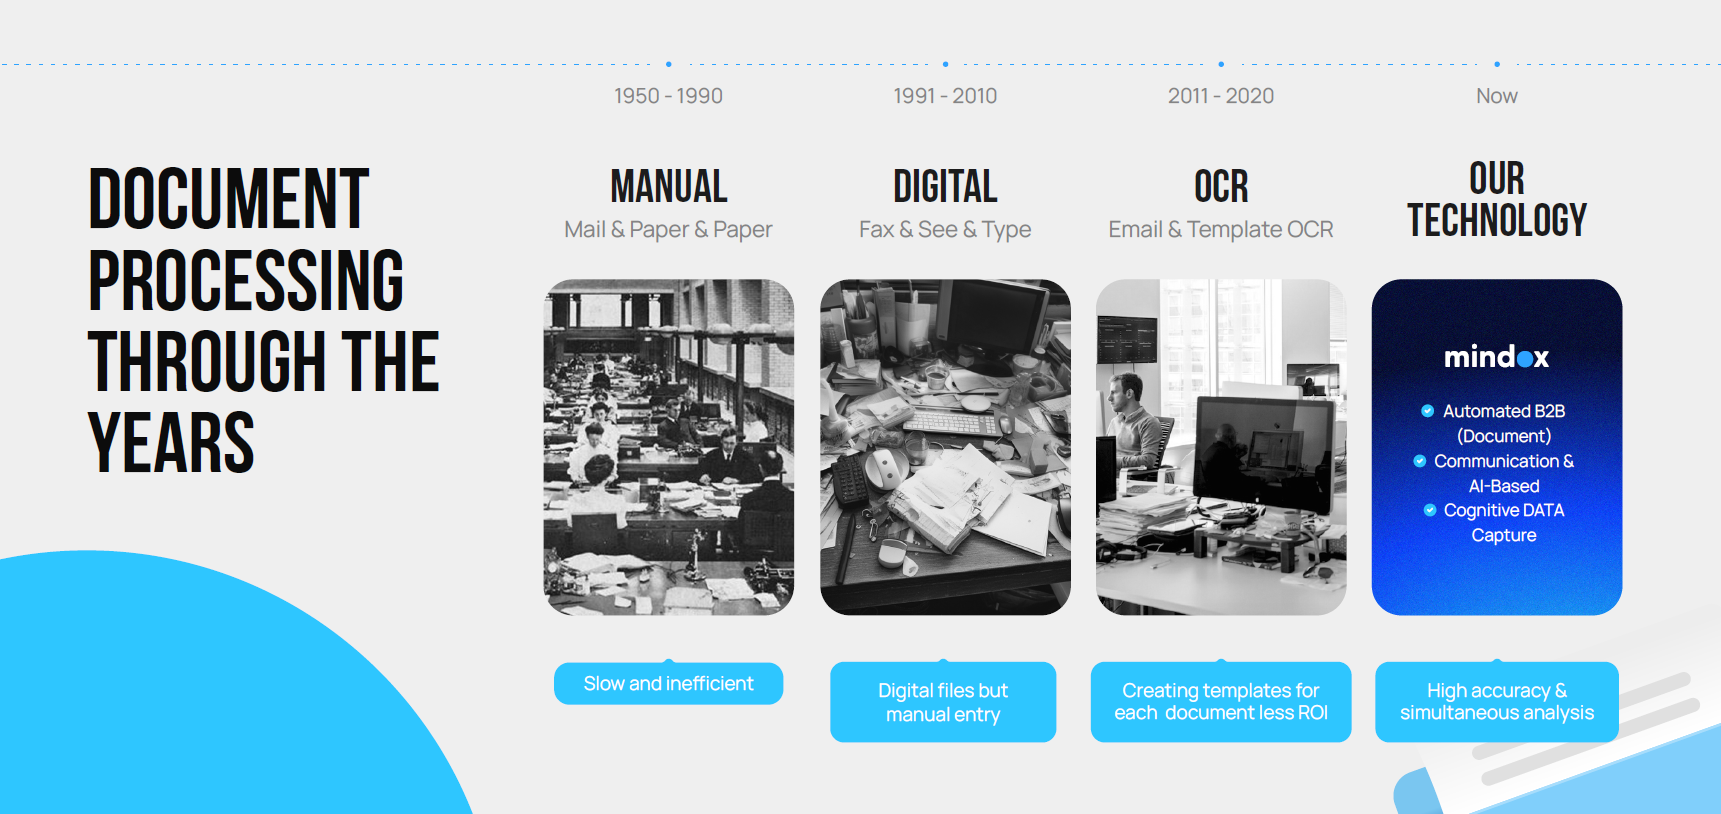 Document processing through the years